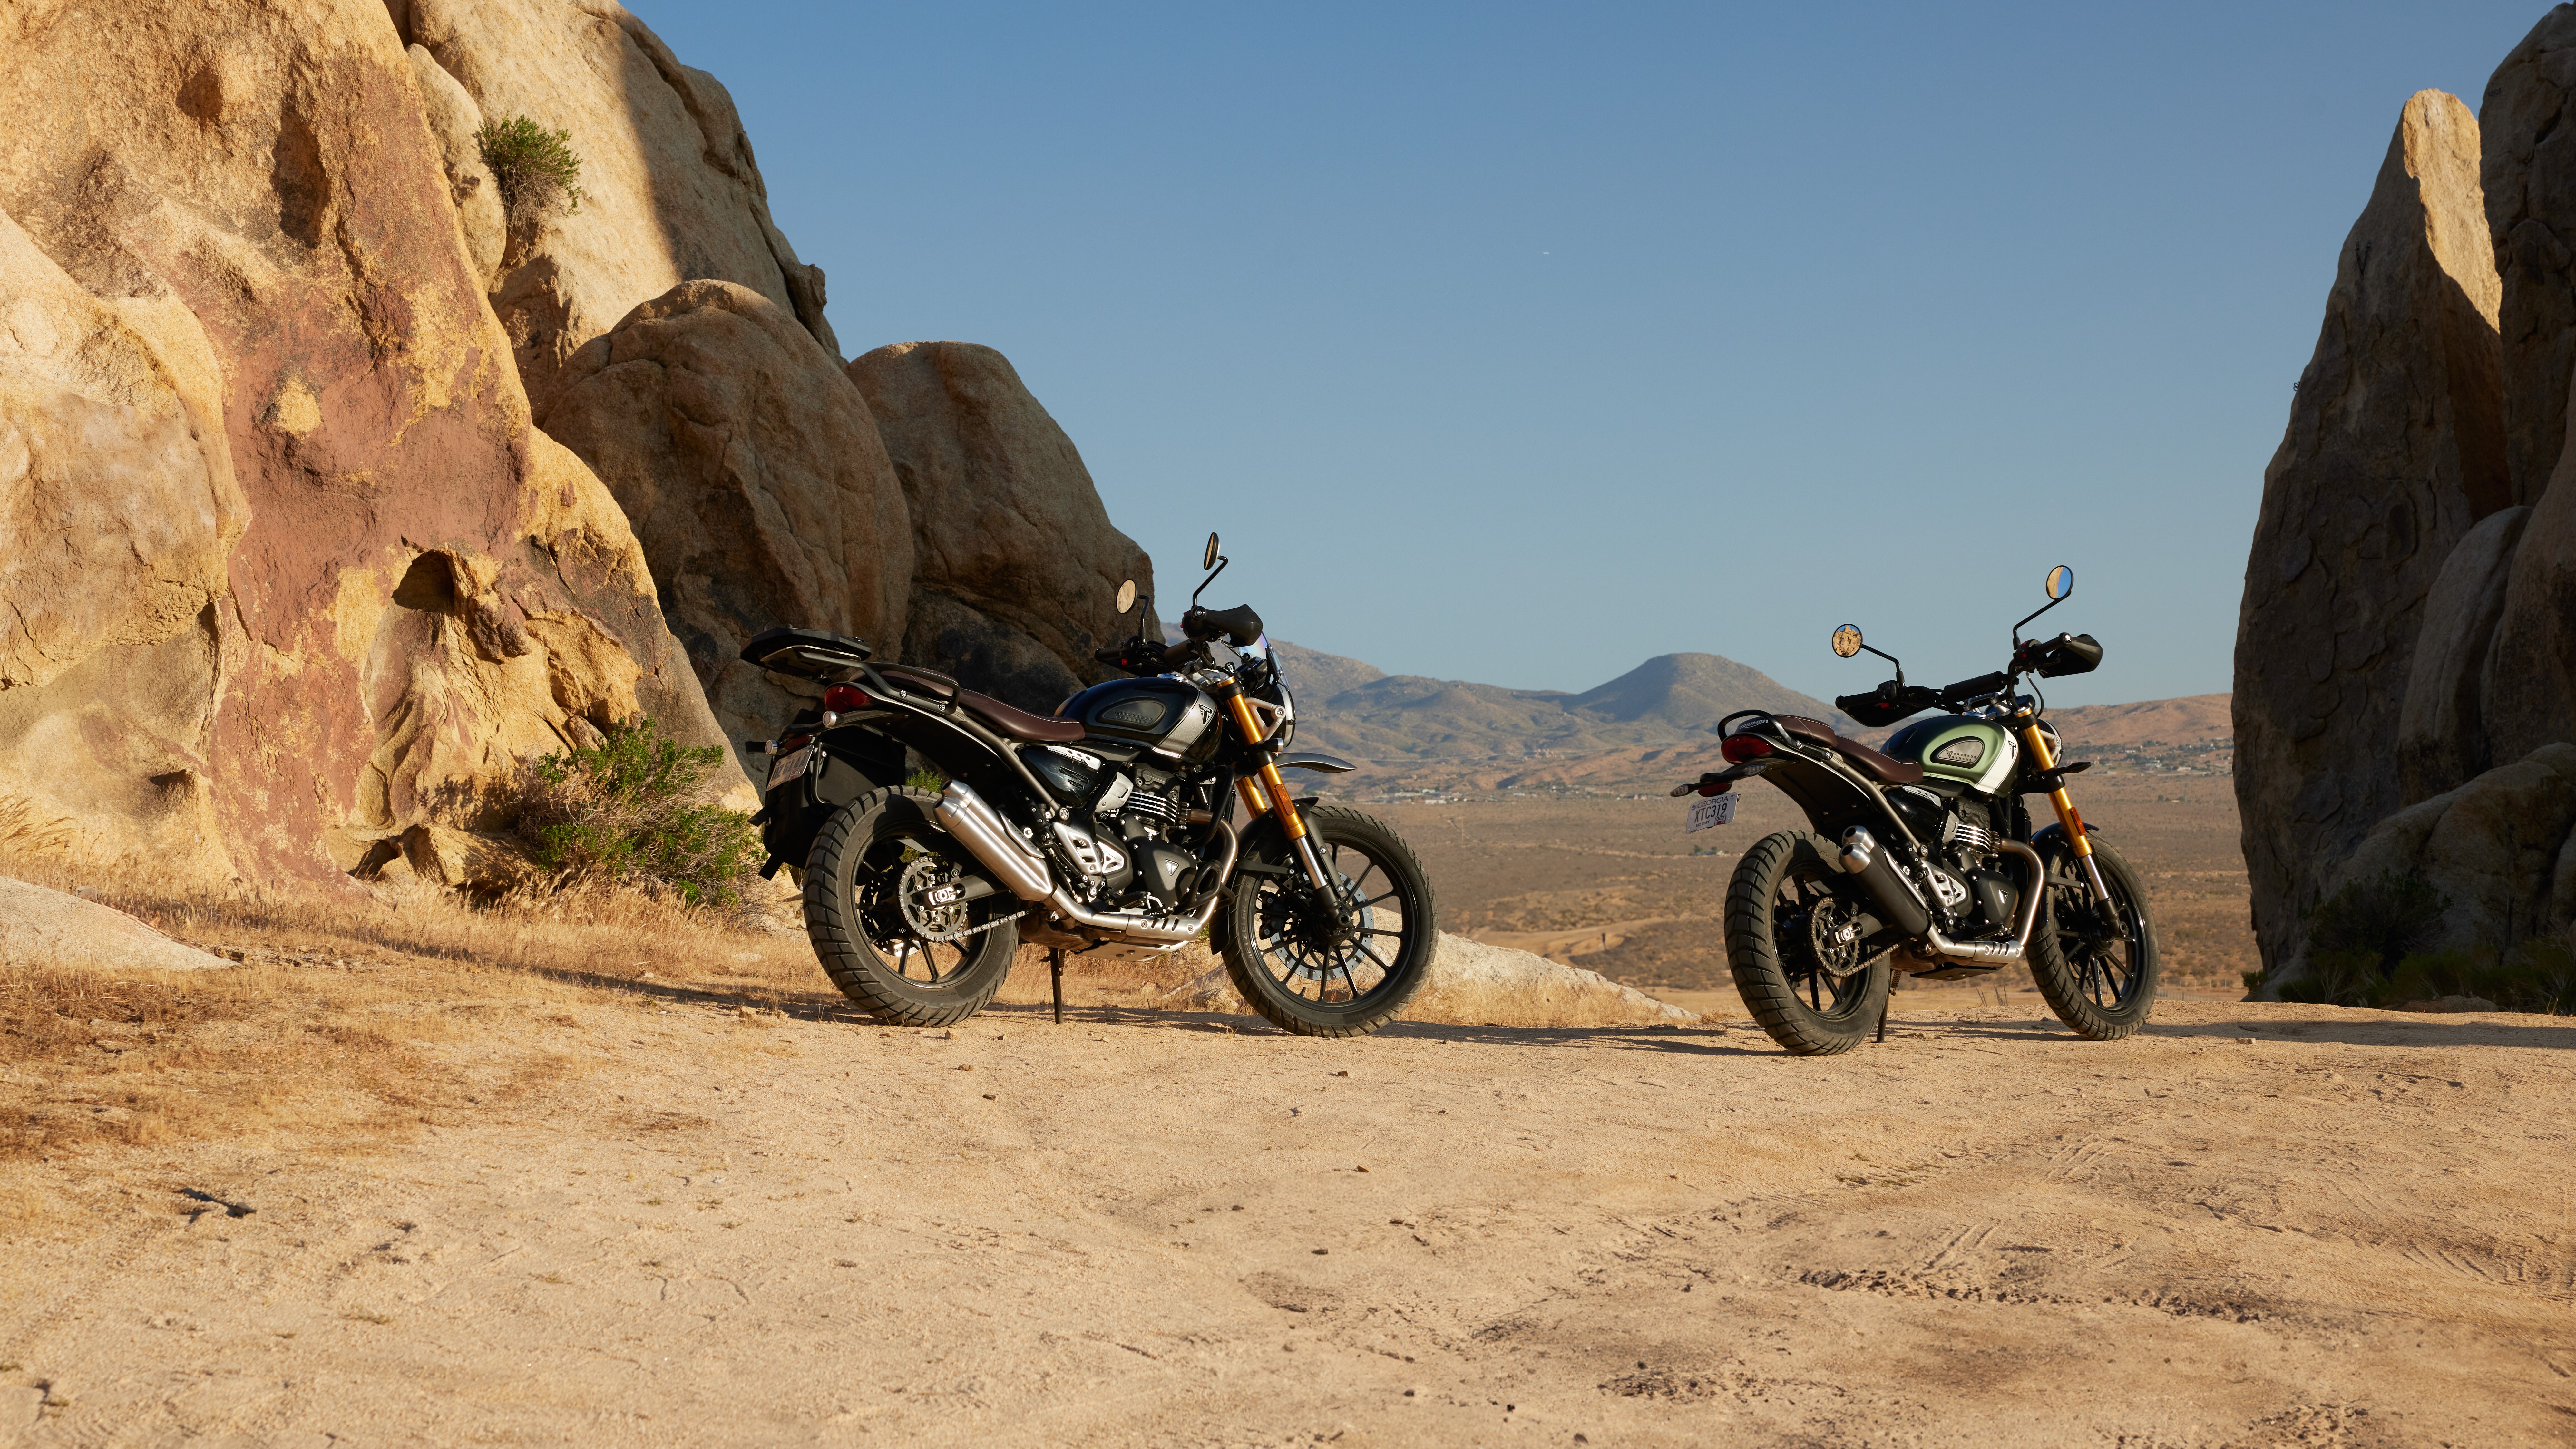 HD wallpaper of Triumph Speed 400 and Triumph Scrambler 400 X motorcycles parked side by side in a scenic desert landscape, ideal for a desktop background.